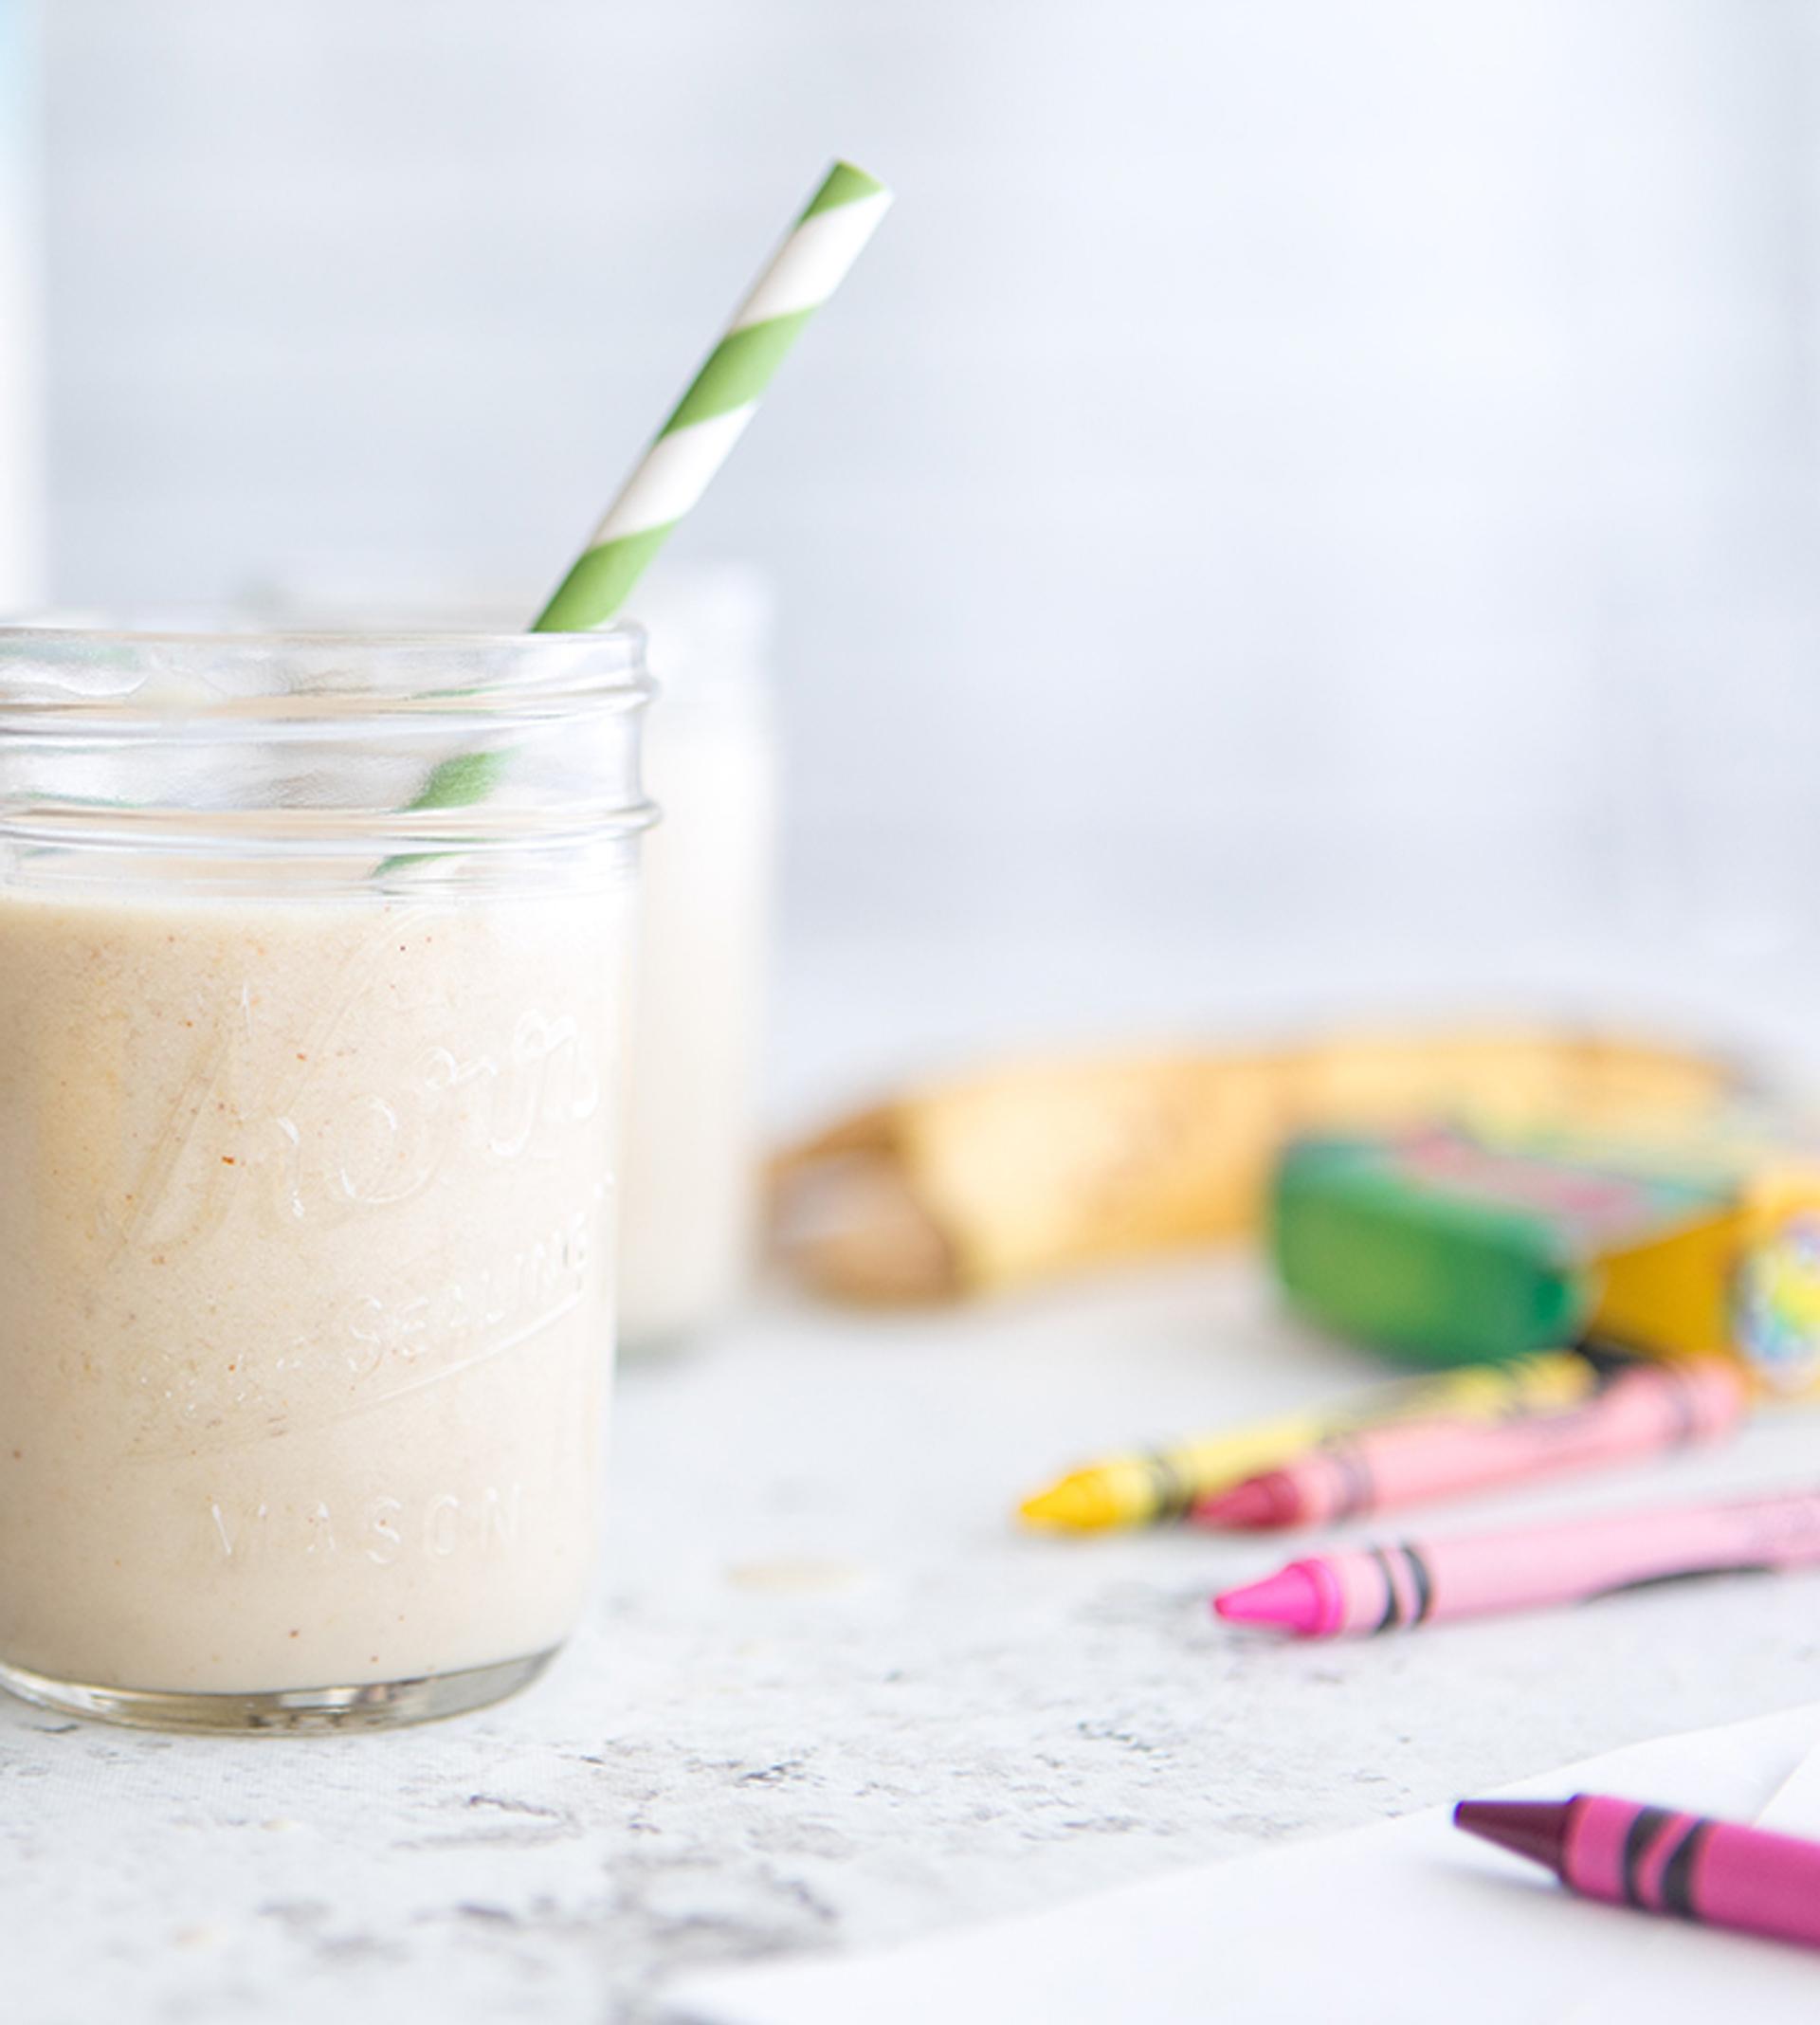 Side view of a light-colored smoothie in a mason jar with a striped green and white straw, and crayons scattered around.